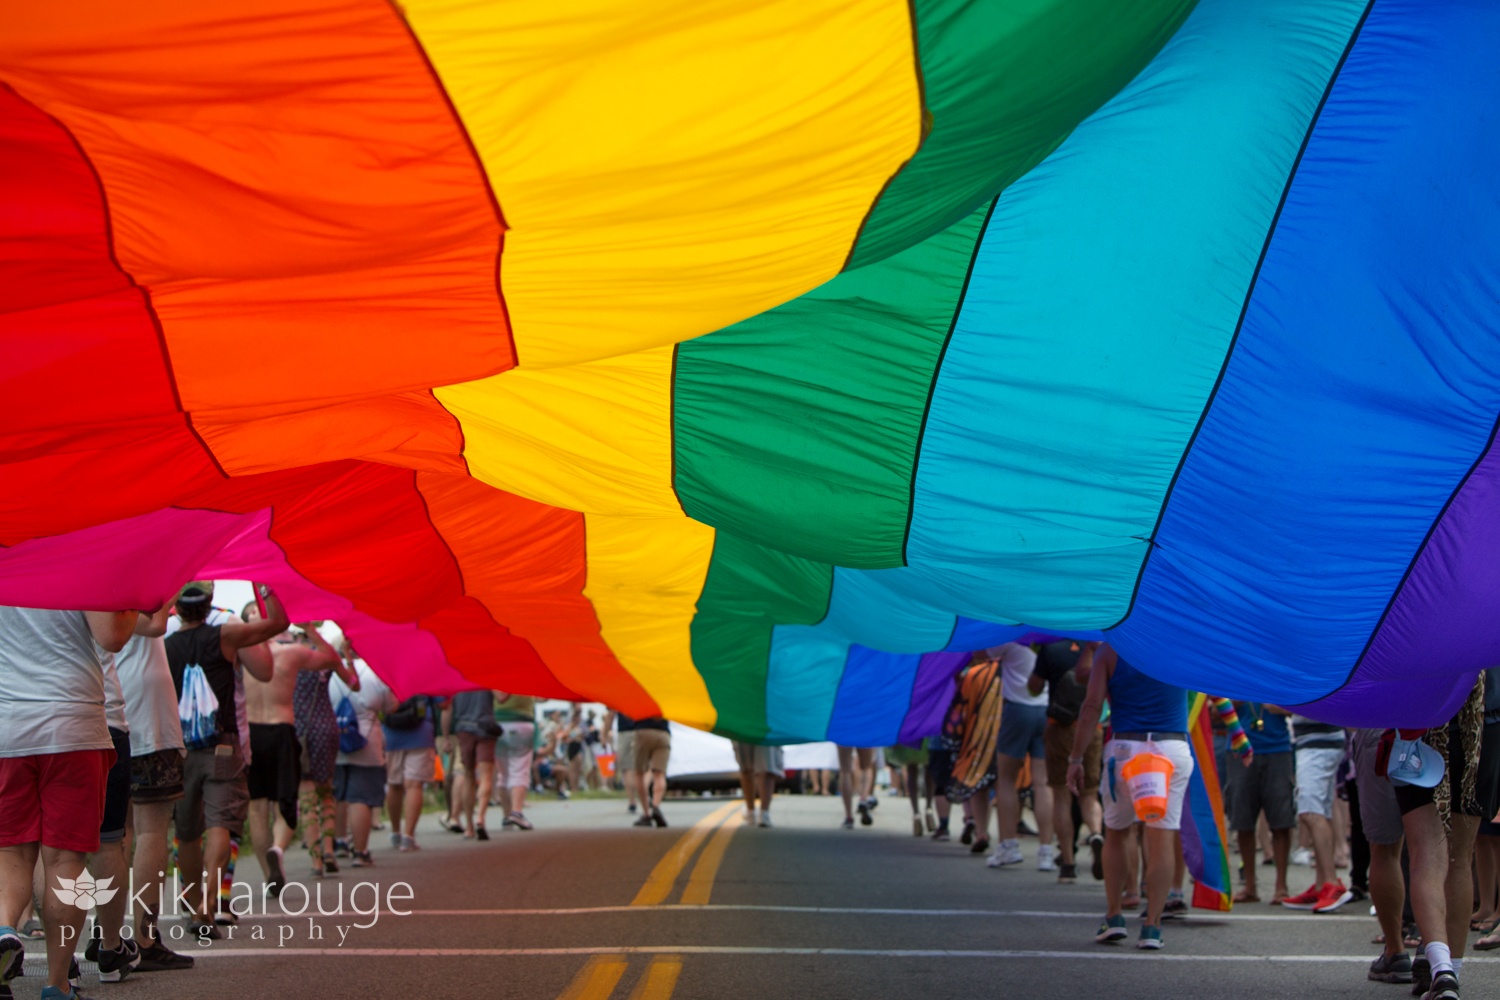 Under large rainbow flag held by many people in parade